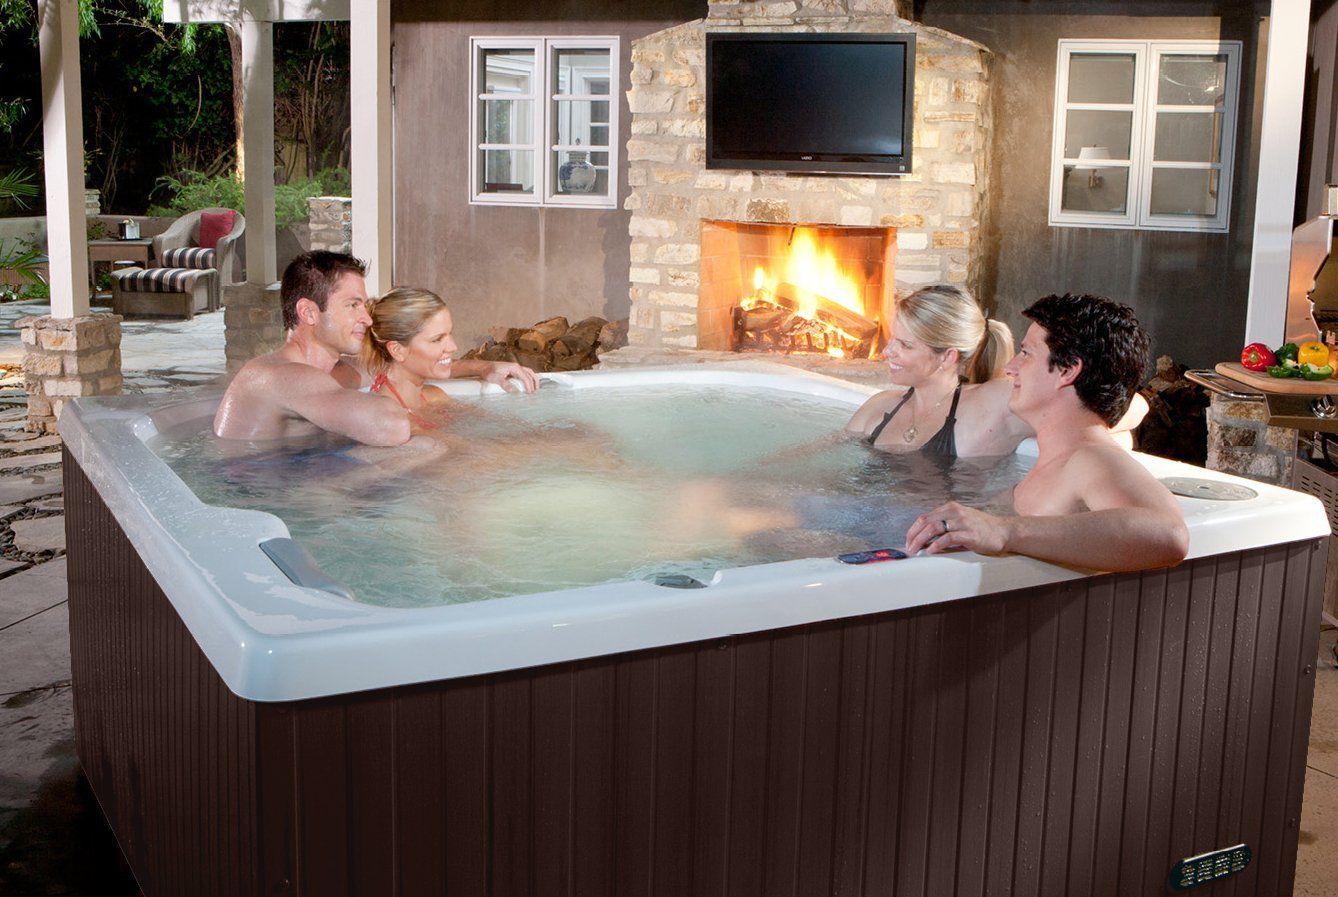 couples enjoying a night in the hot tub